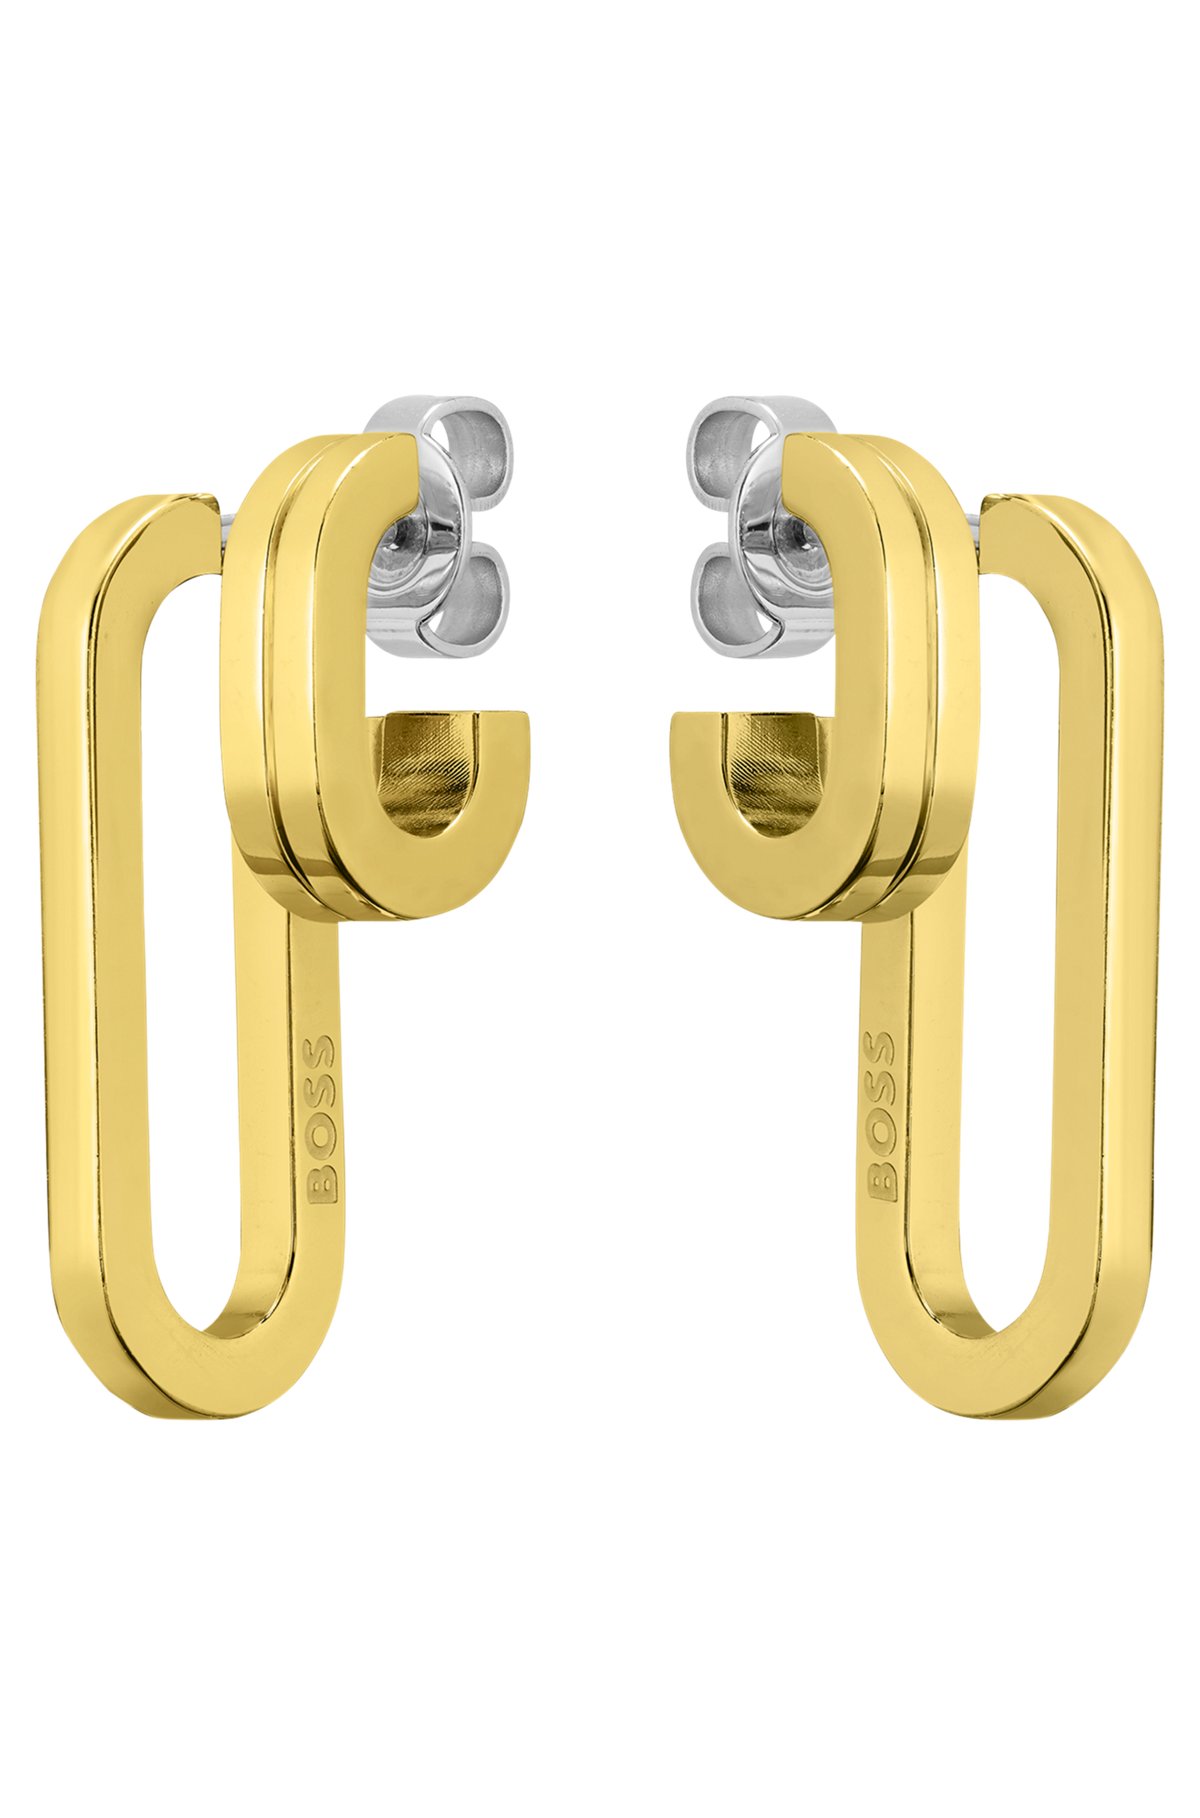 BOSS - Polished-link earrings with stainless-steel posts